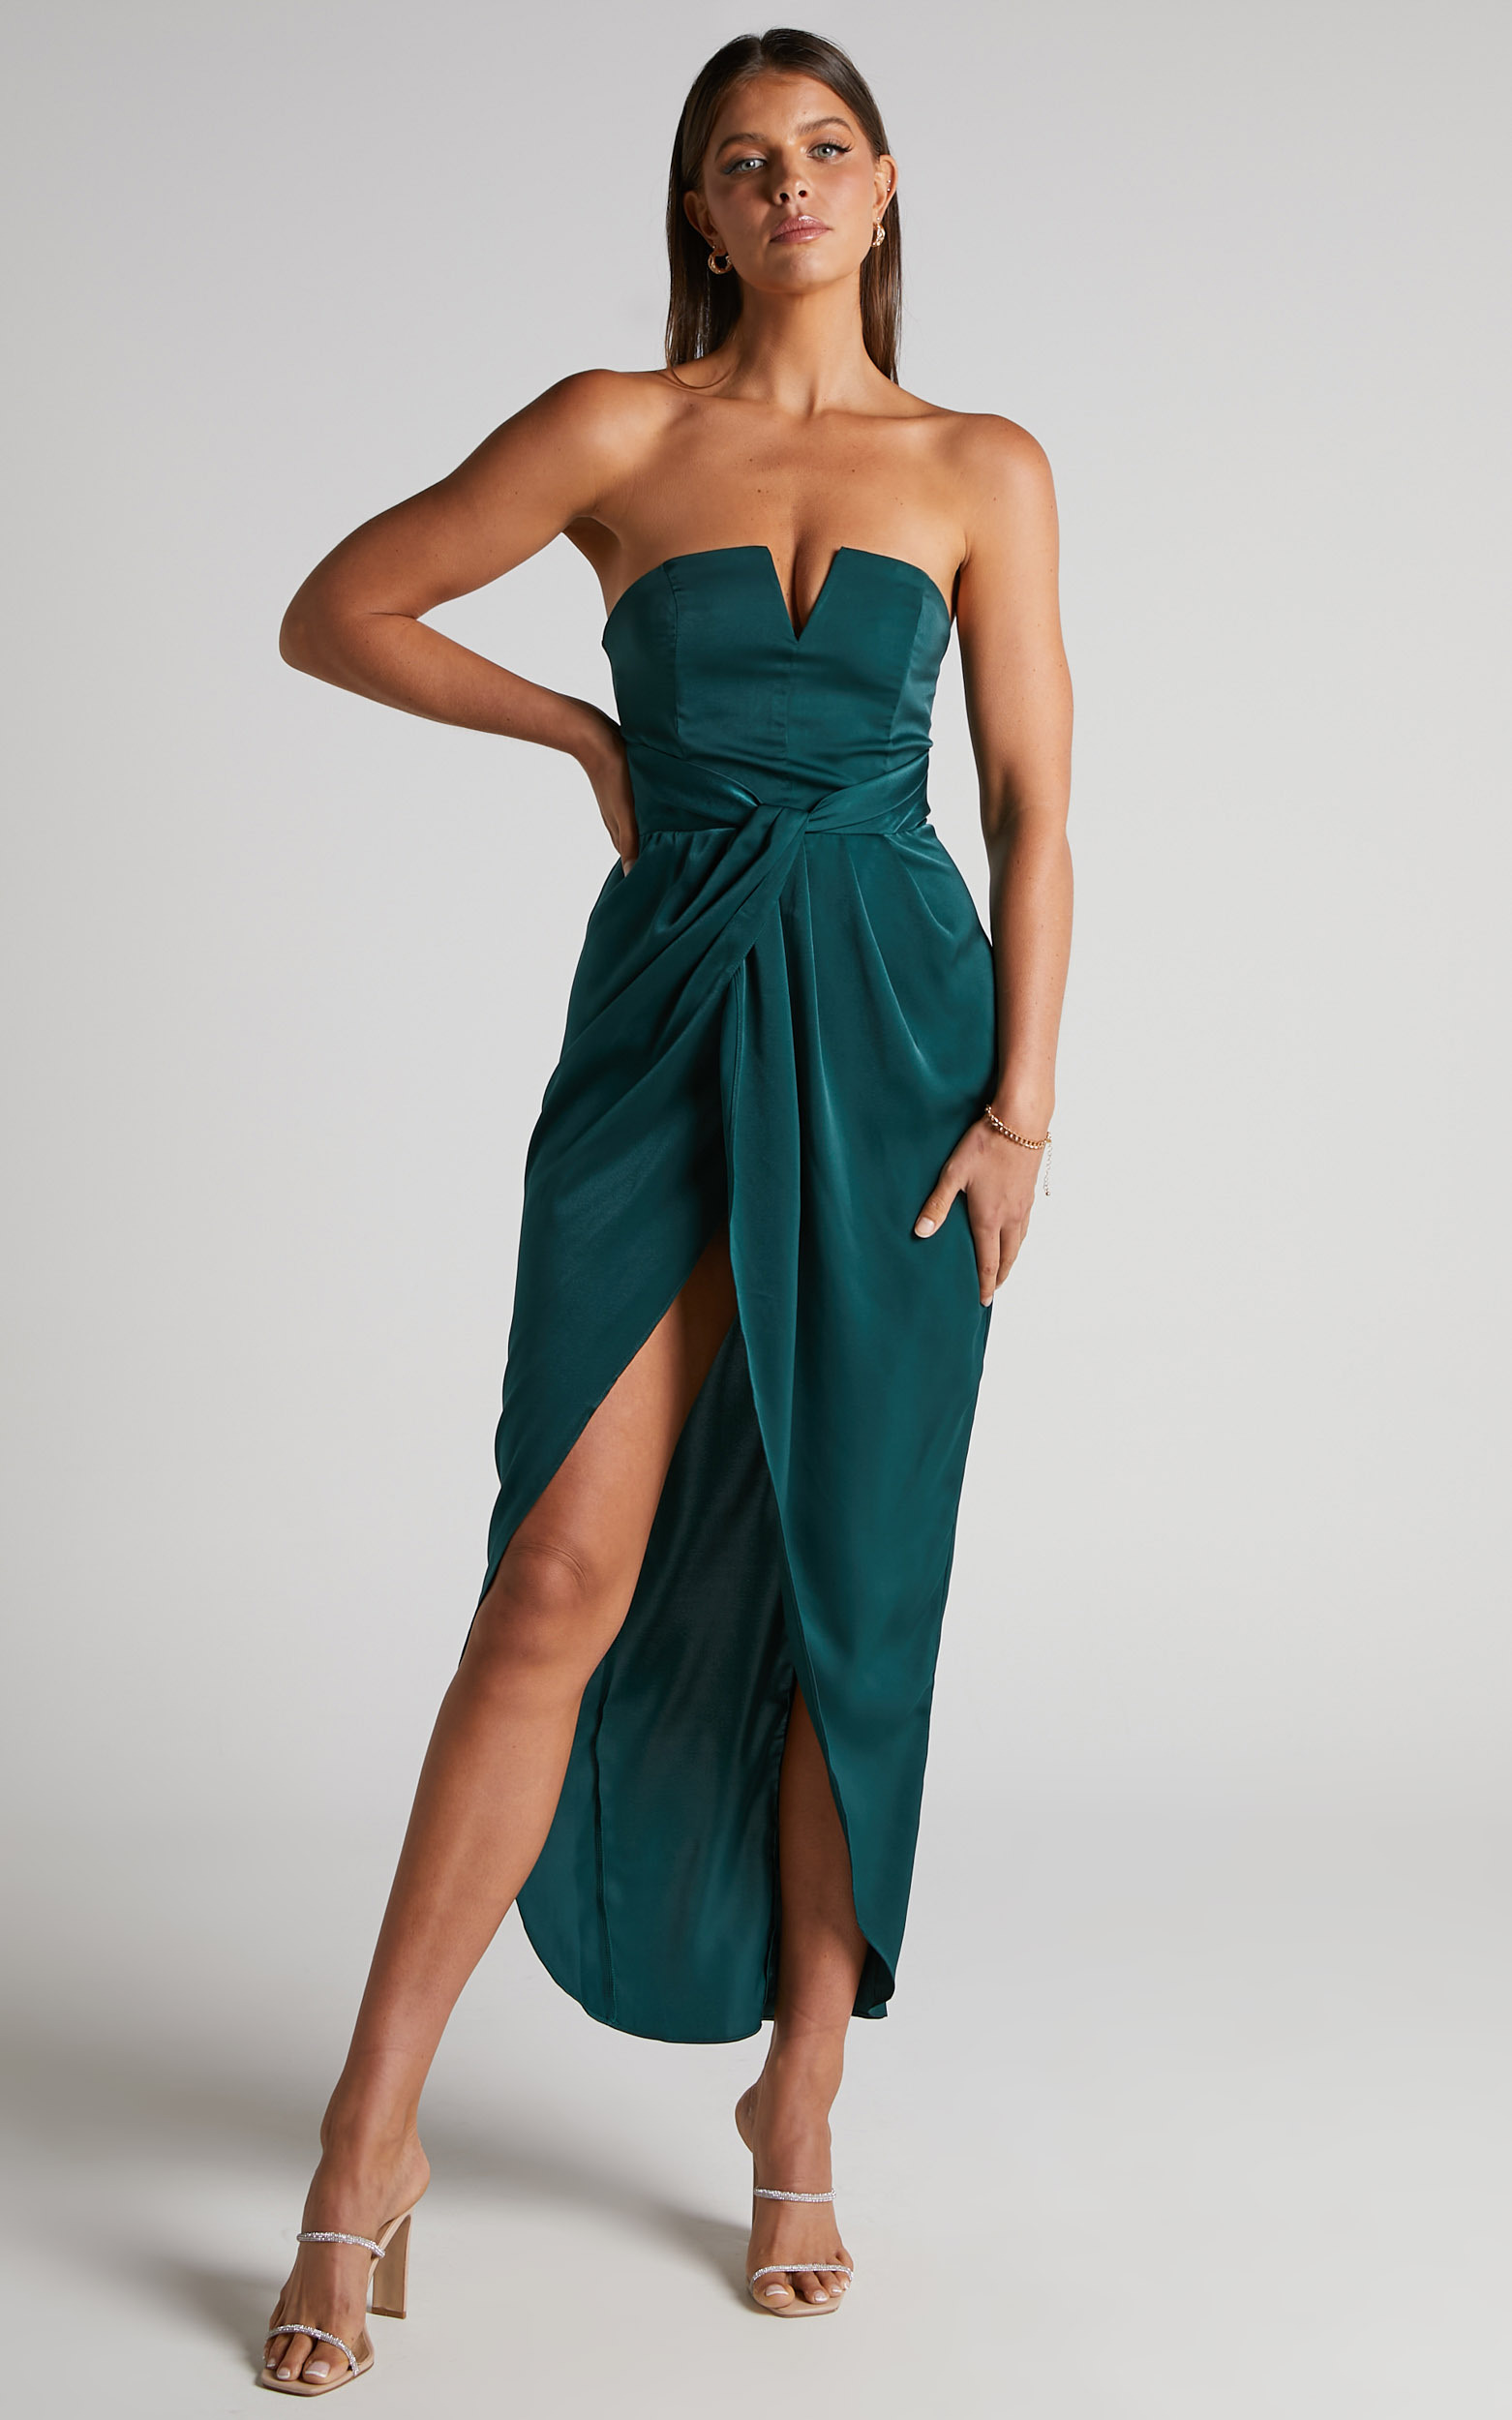 Rhyanna Maxi Dress - Twist Front Strapless Dress in Emerald - 06, GRN1, hi-res image number null